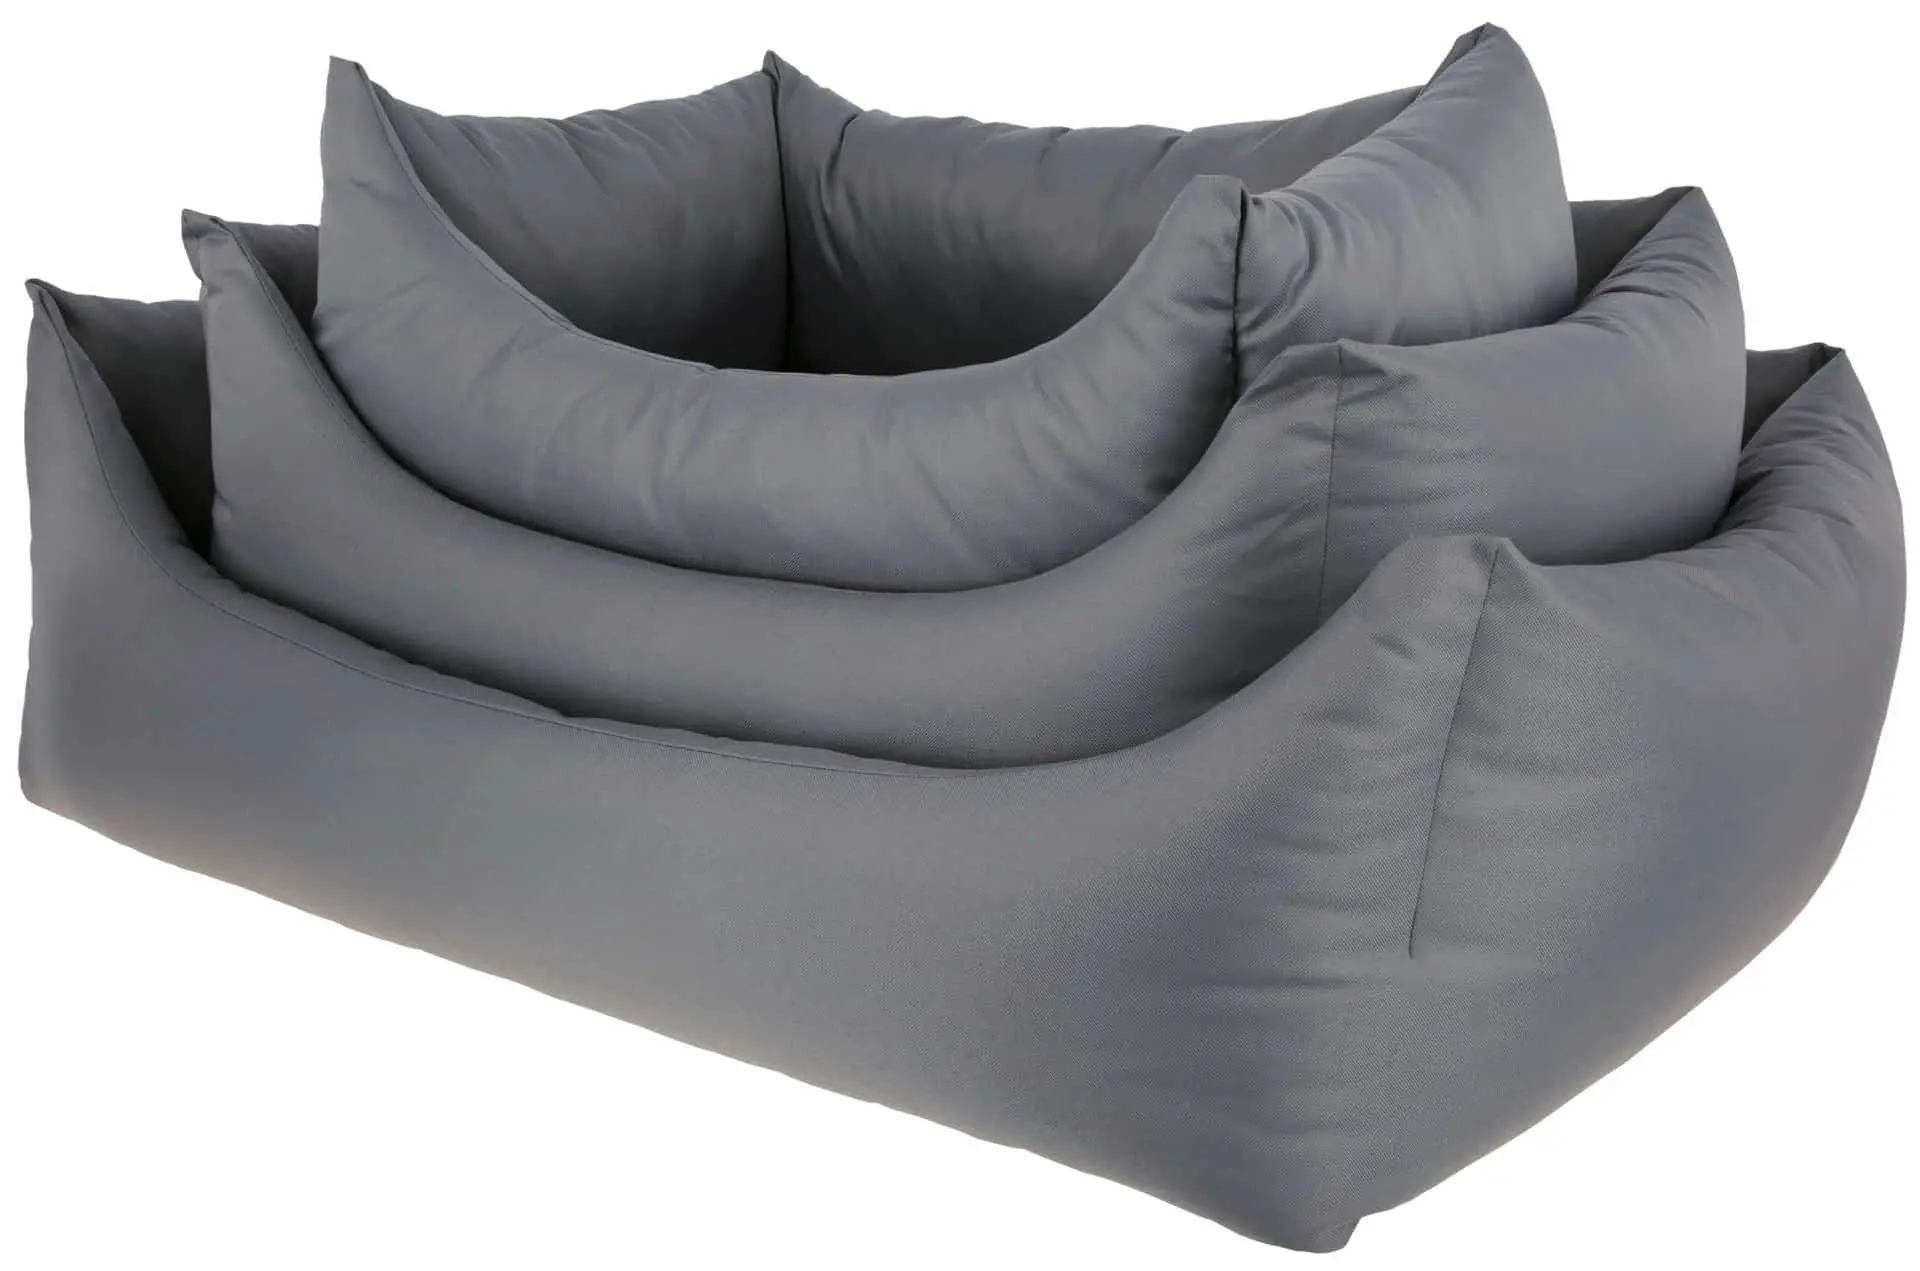 Cosy Bed Oxford Place, light grey, 60 x 70 cm